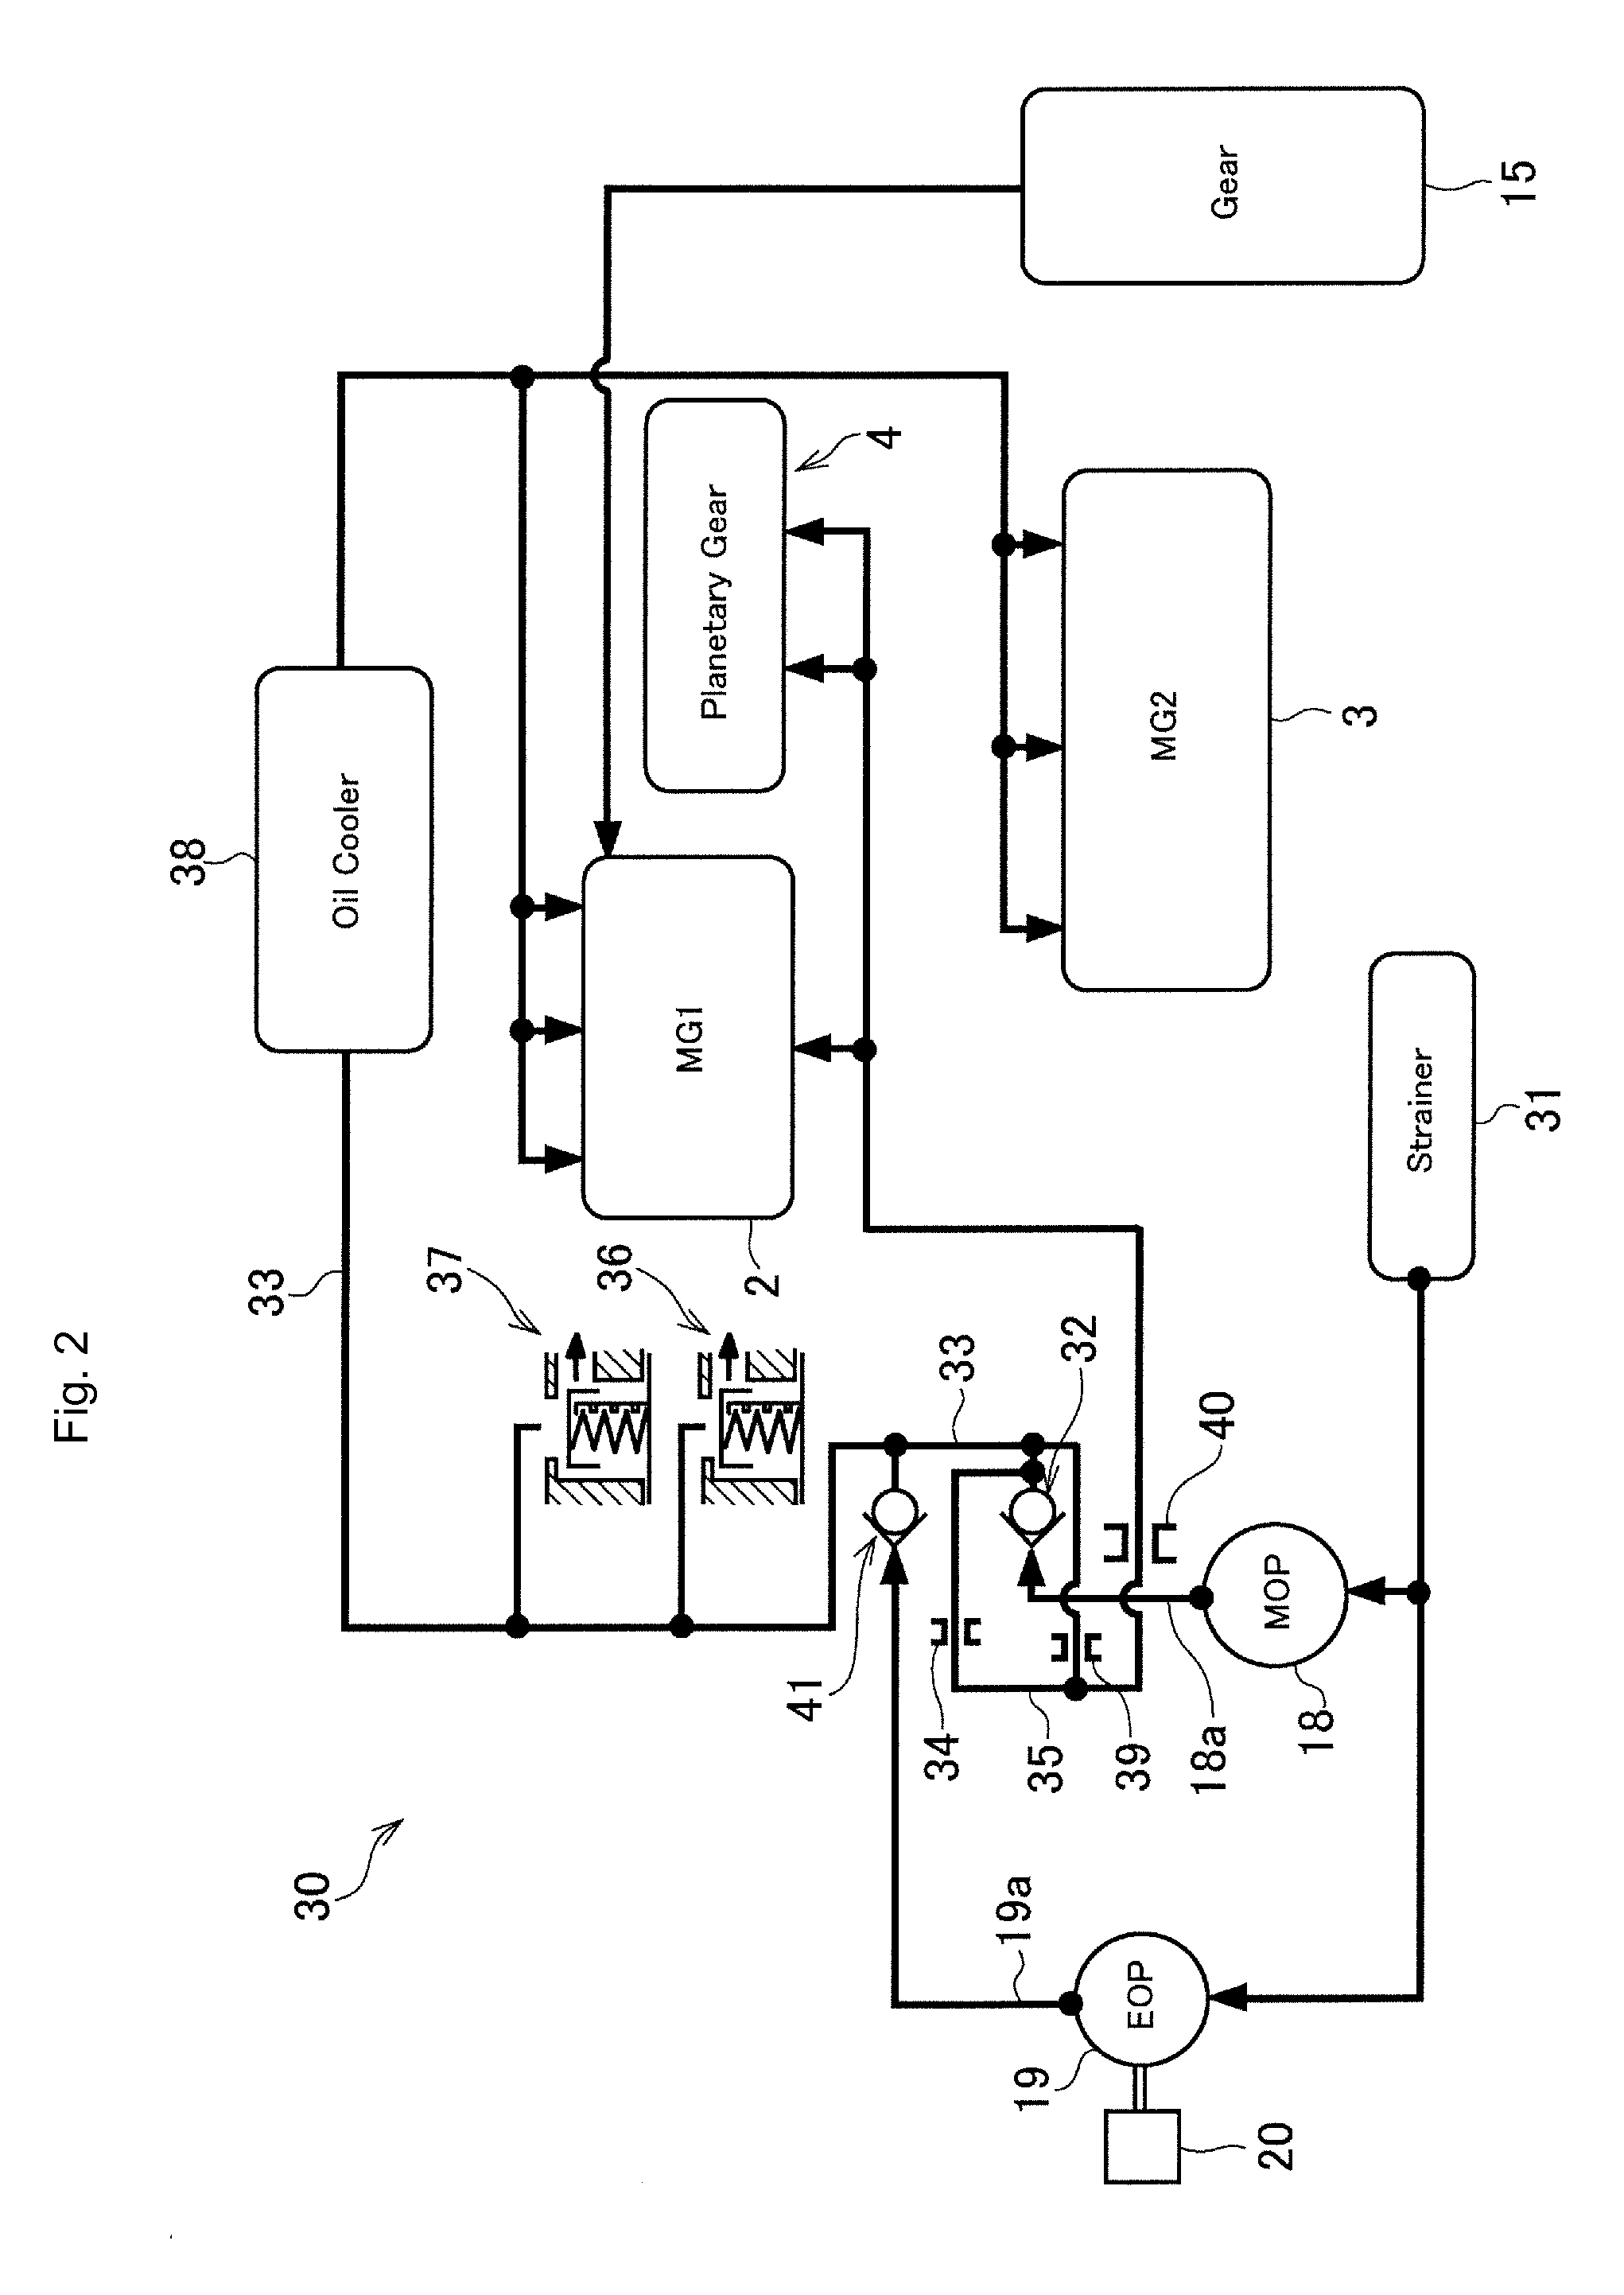 Control system for electric vehicle